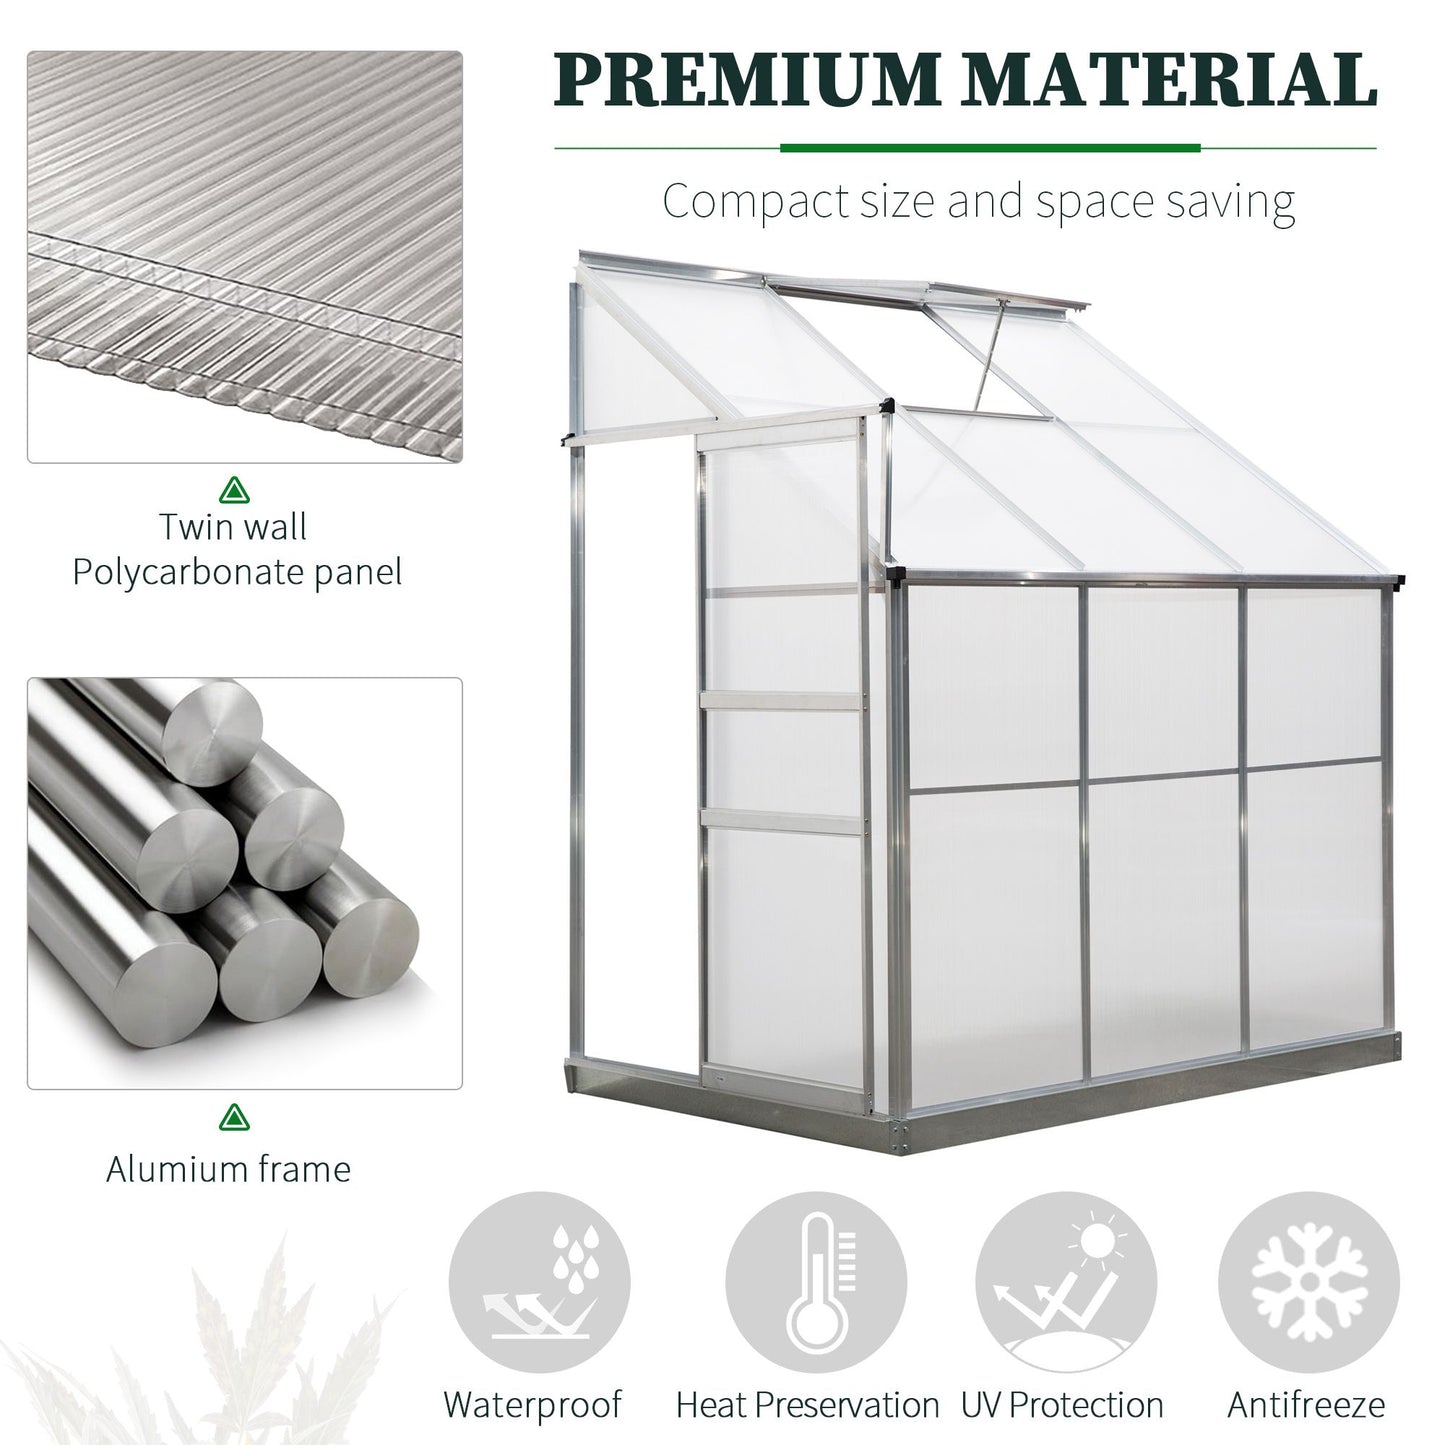 Outsunny Walk-In Garden Greenhouse Heavy Duty Aluminum Polycarbonate with Roof Vent Lean to Design for Plants Herbs Vegetables 192 x 125 x 221 cm Frame w/